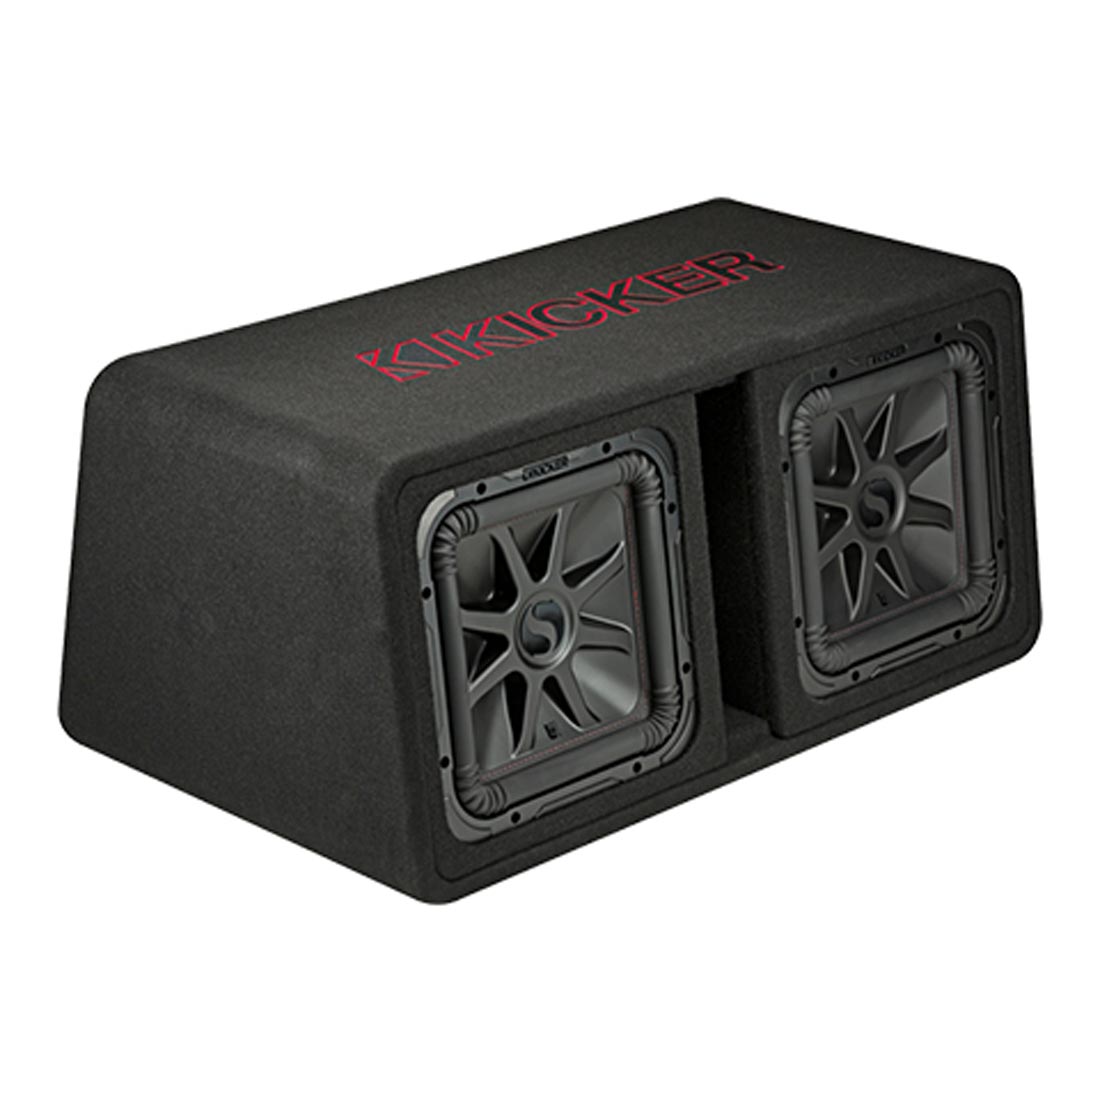 Kicker 45DL7R122 1200W Loaded 2-Ohm Vented Enclosure with Dual Solo-Baric L7R 12" Subwoofers